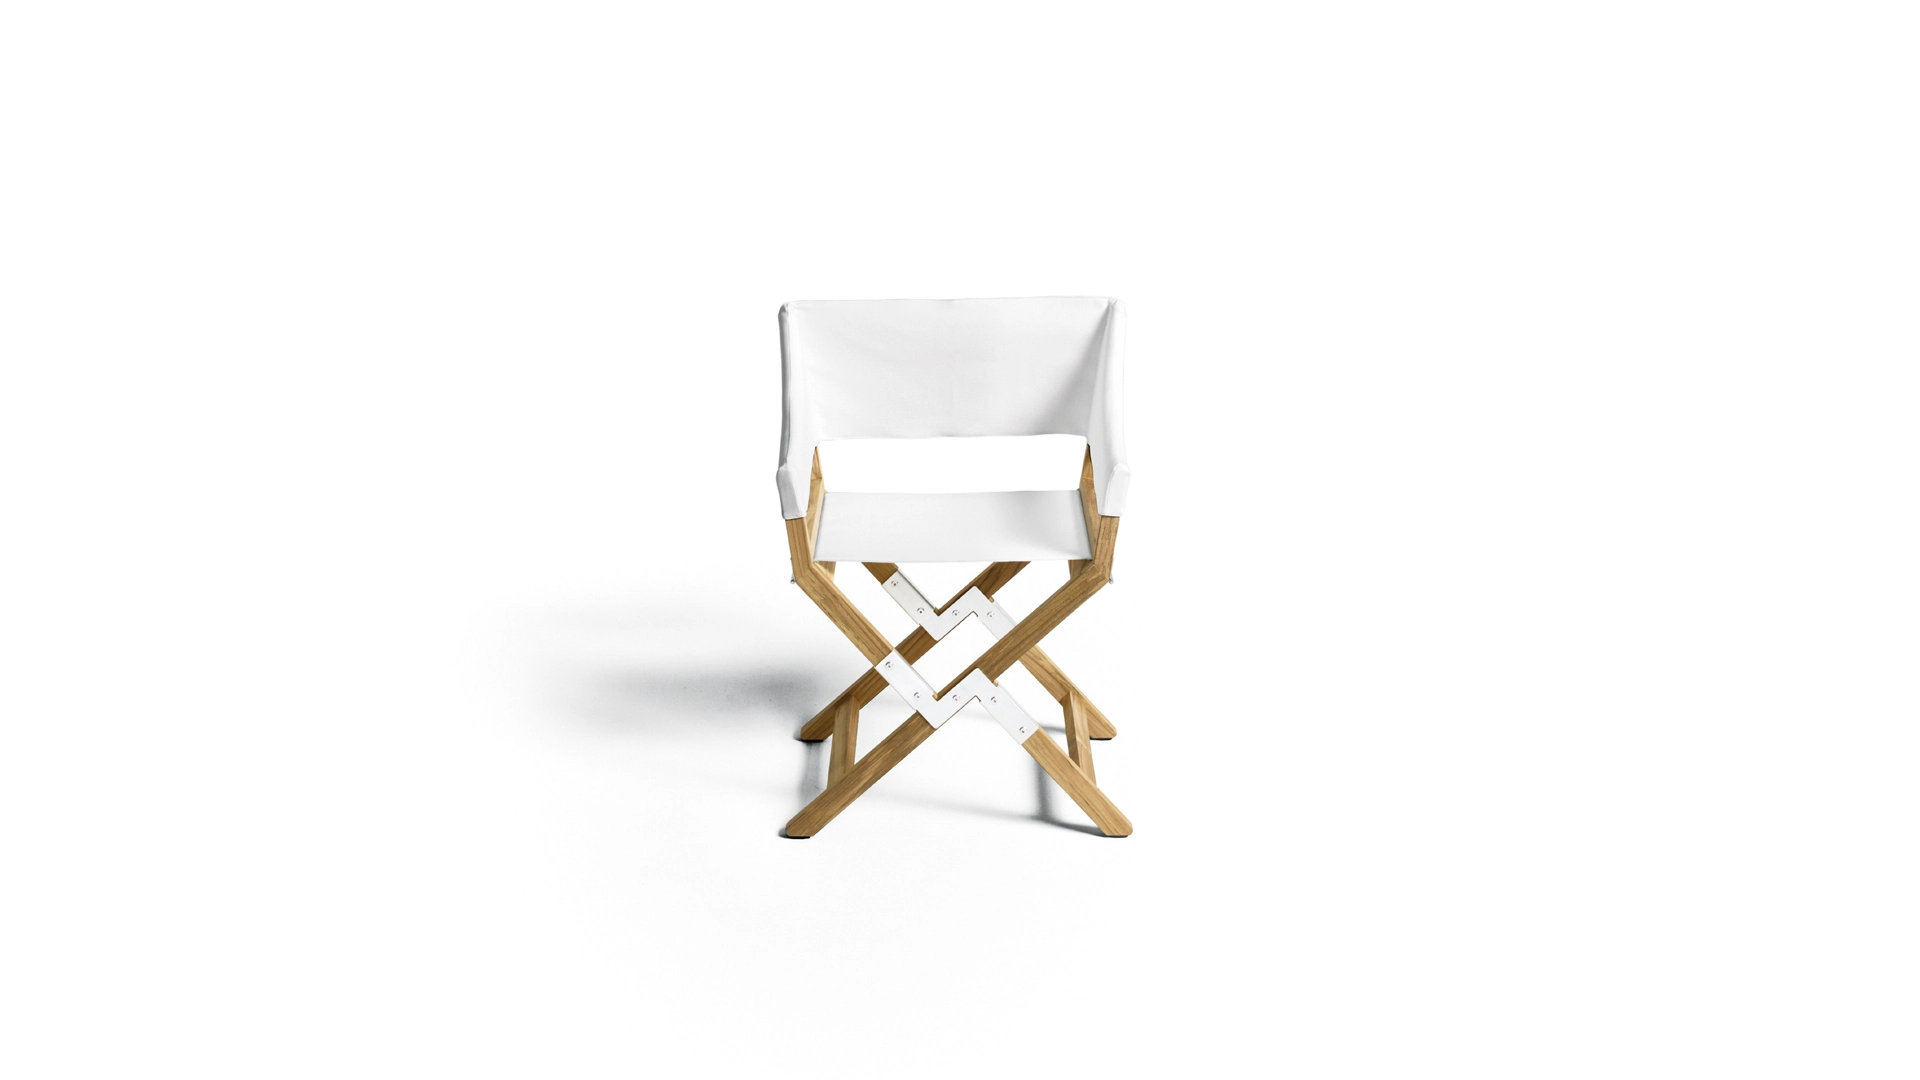 Sundance Outdoor: folding chair designed by Paolo Golinelli